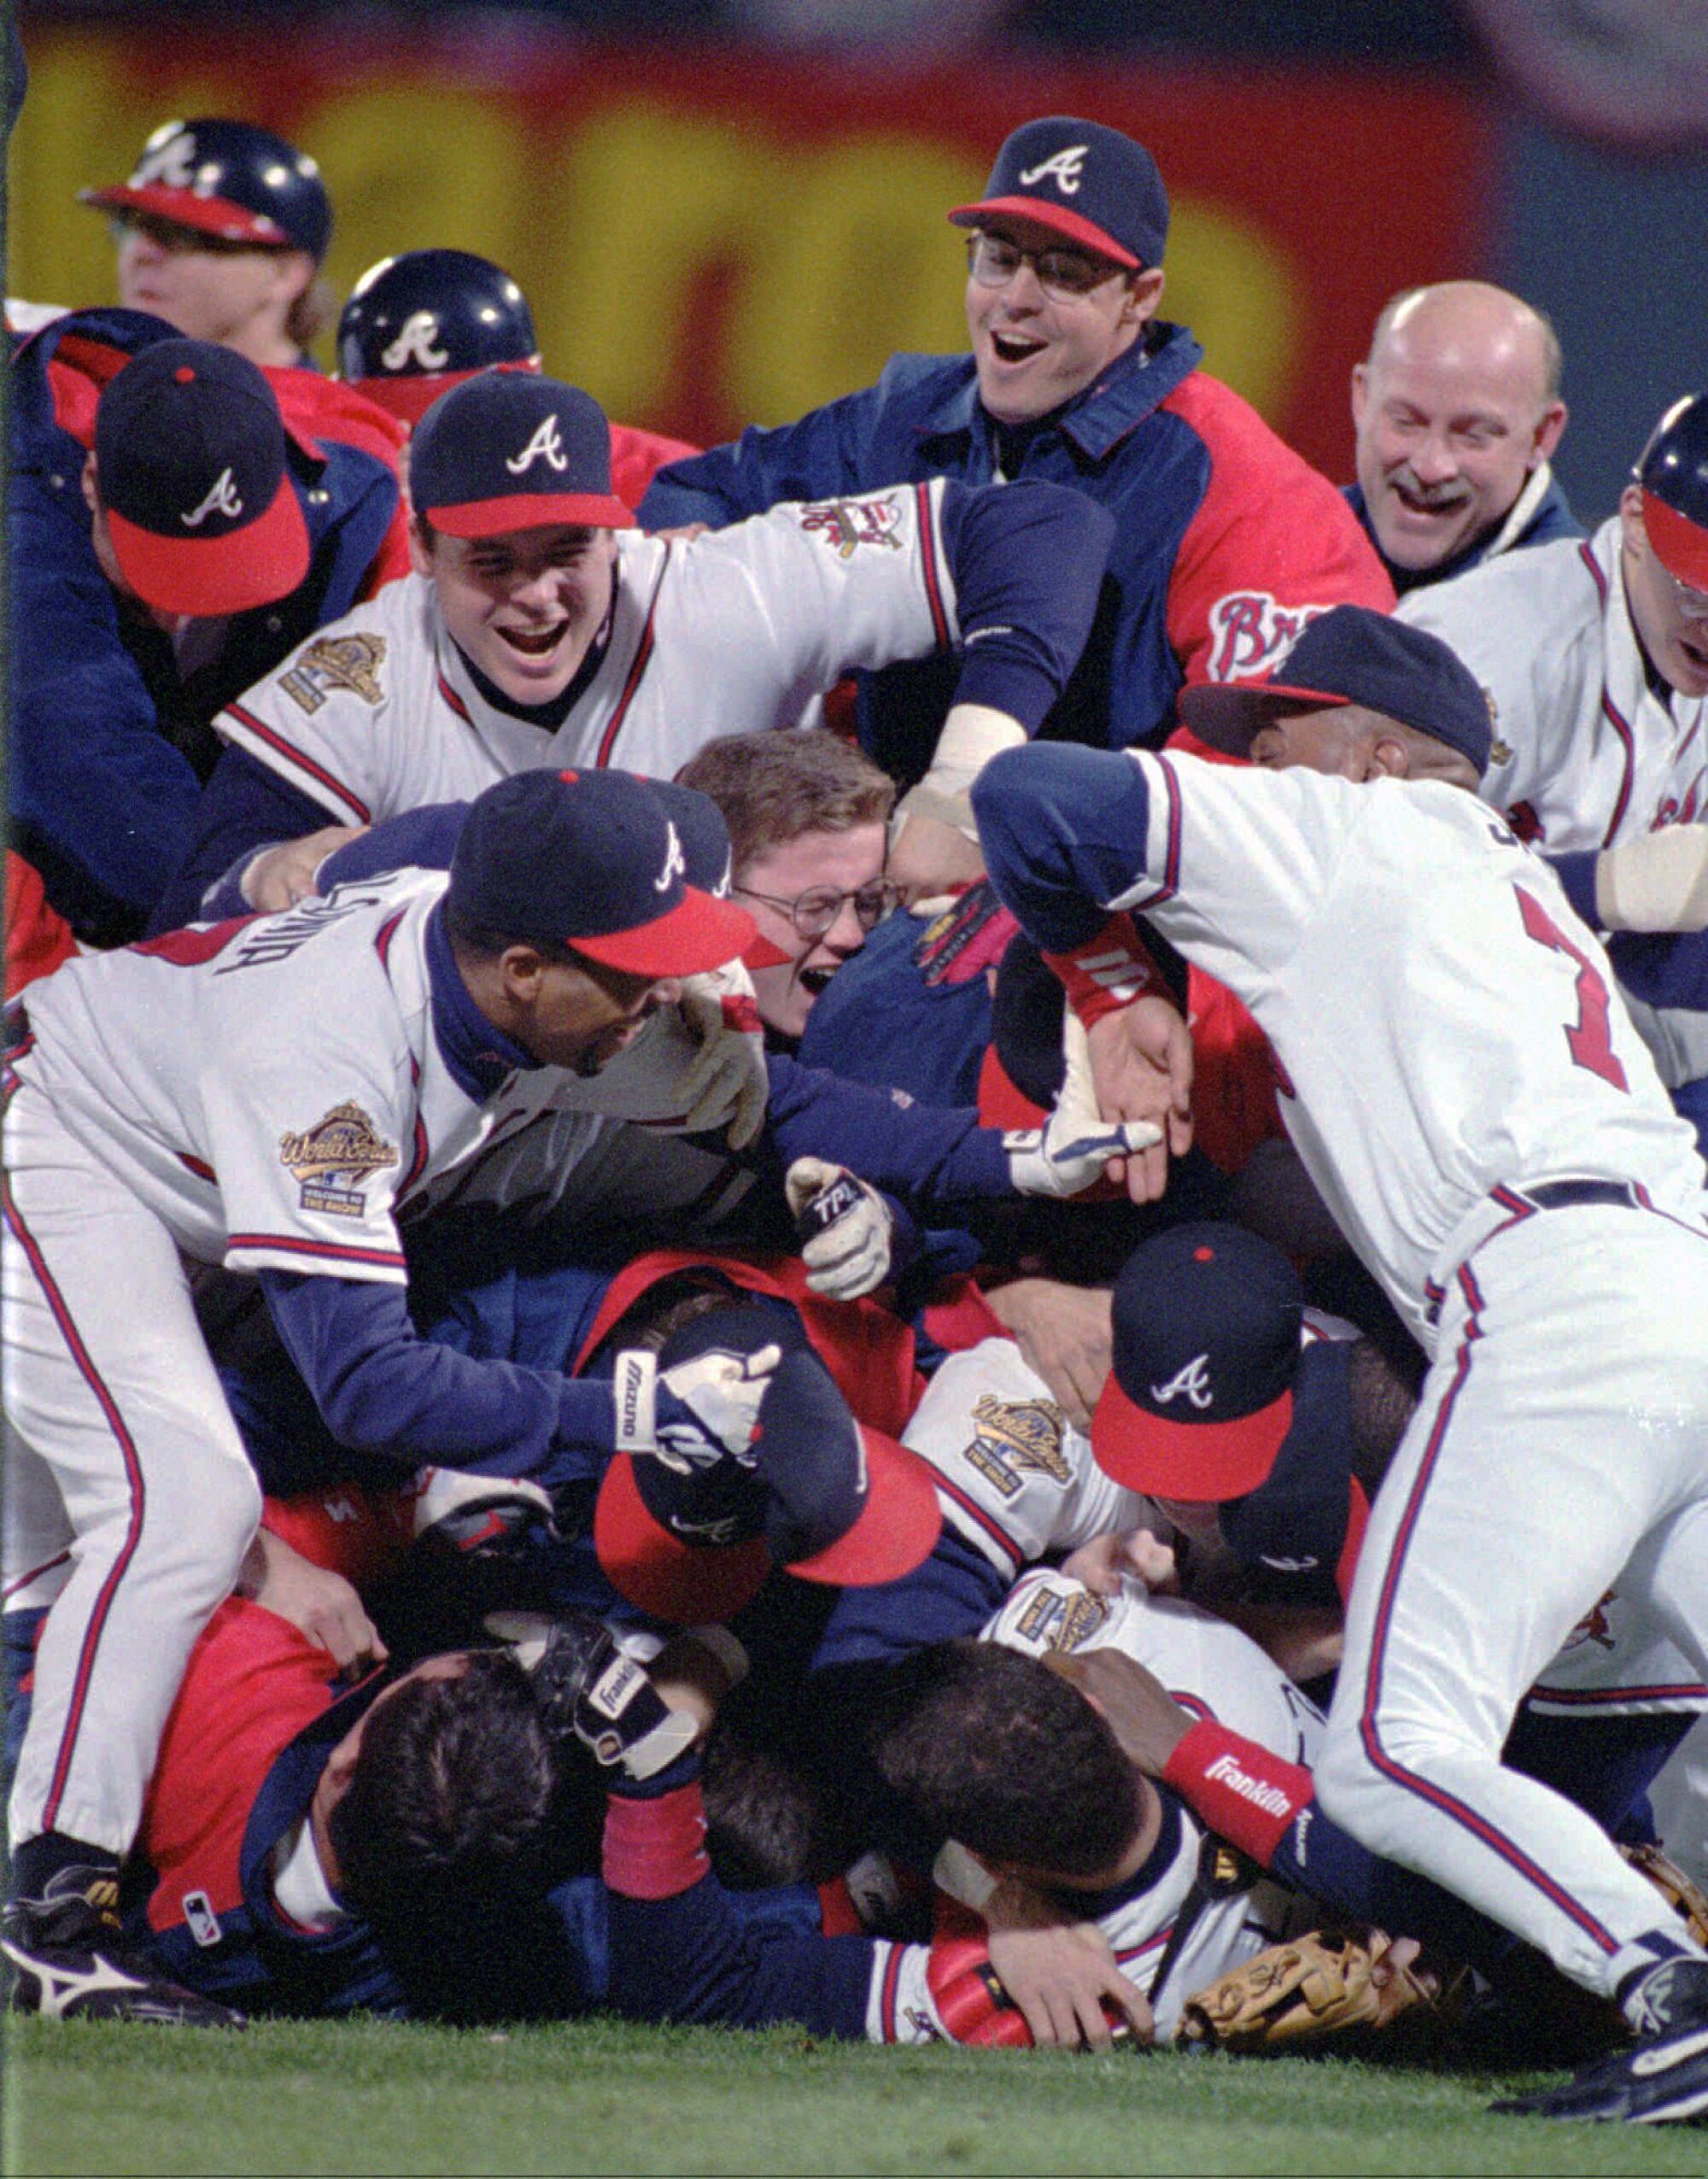 The Atlanta Braves celebrate after defeating the Cleveland Indians in Game 6 of the 1995 World Series.